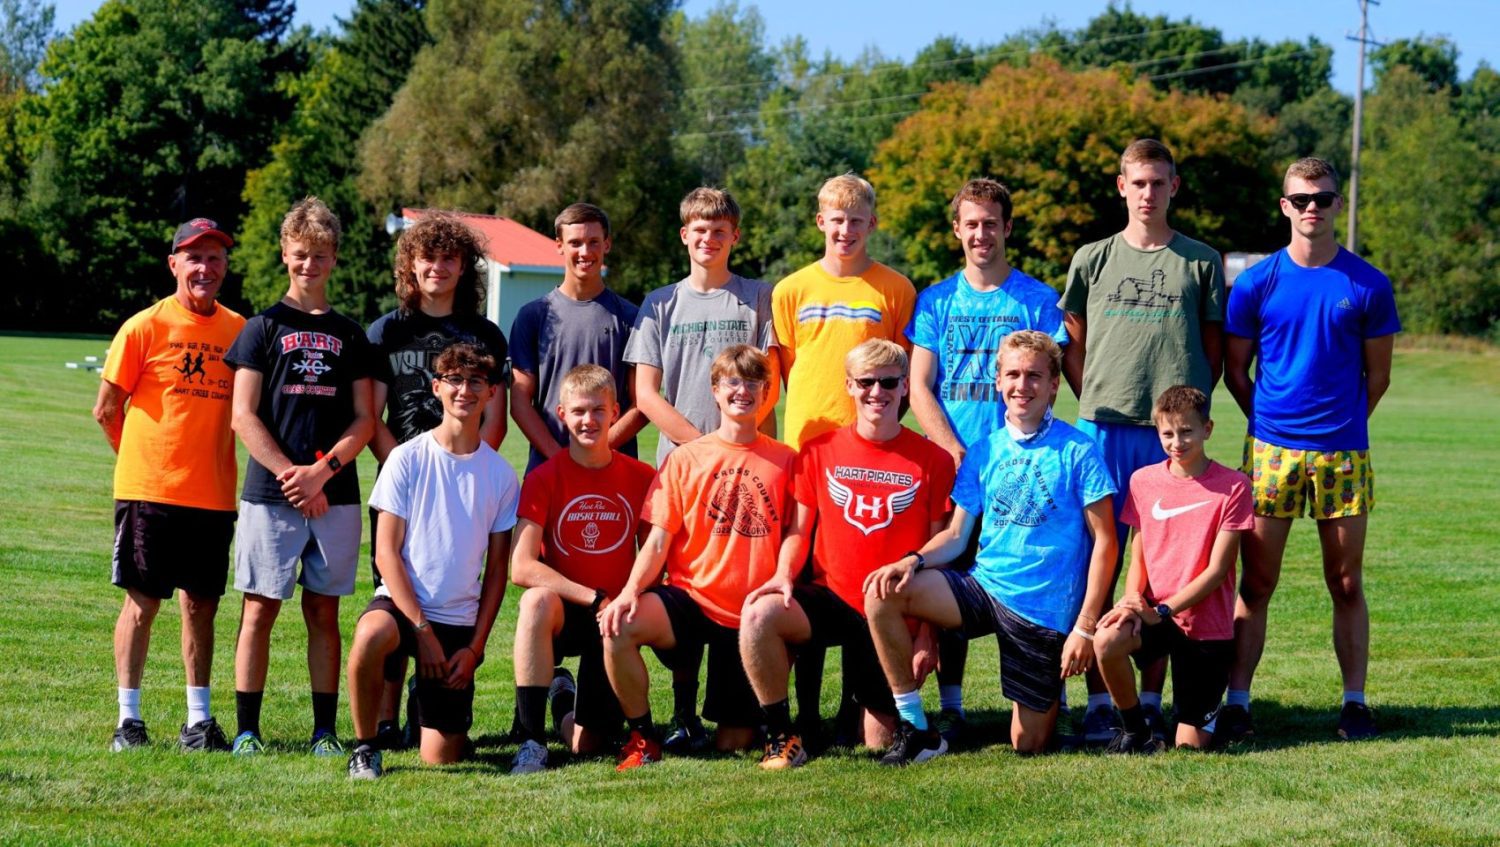 Hart boys claim top spot in Division 3 at Portage invitational, Pirate girls finish second